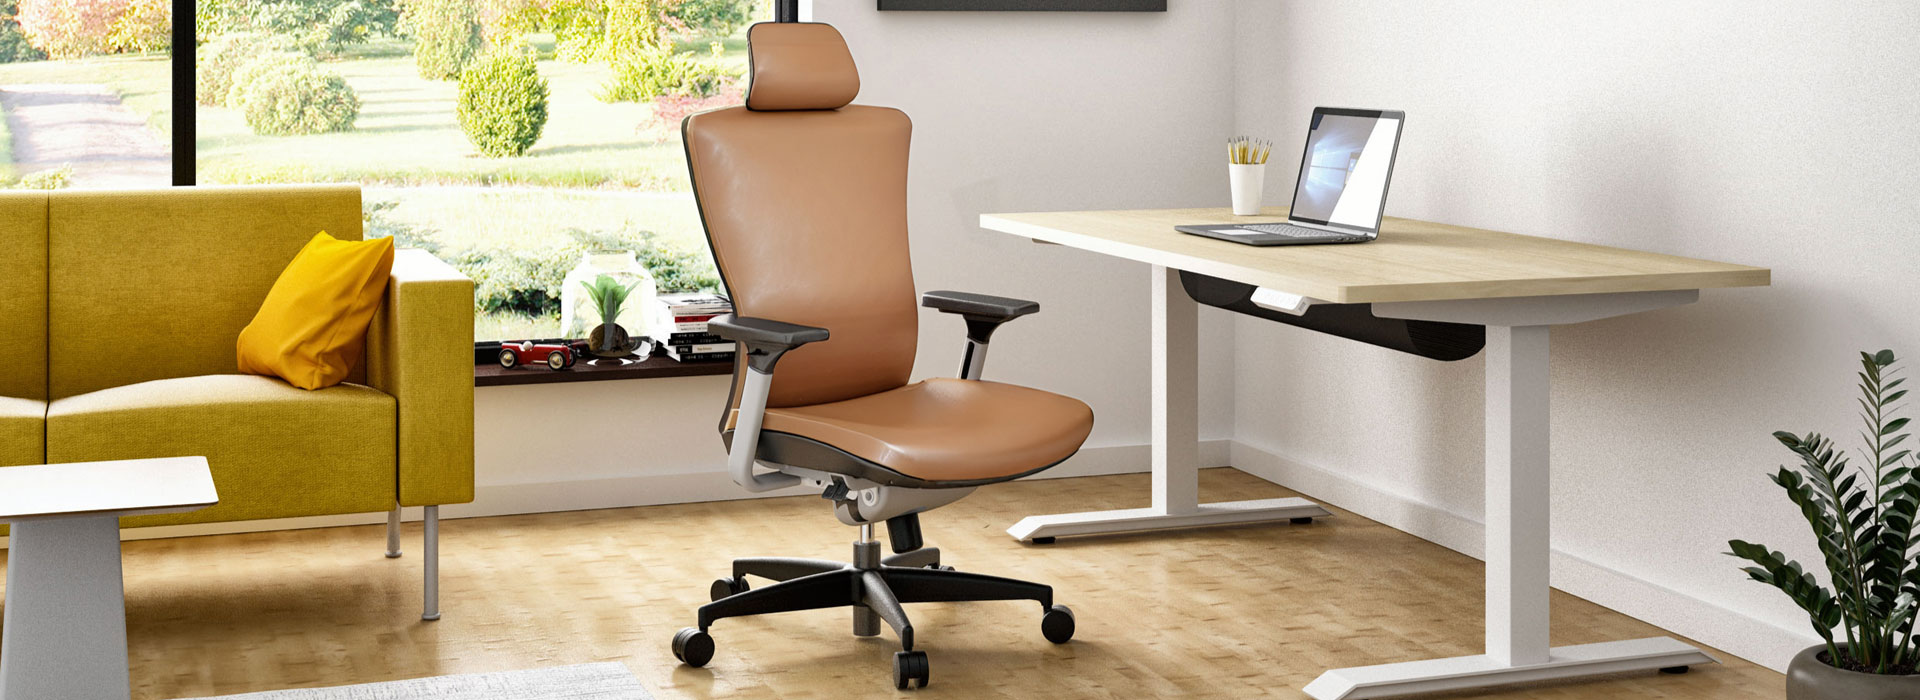 soul premium leather office chair with Vertigo EZ height adjustable table in a living room